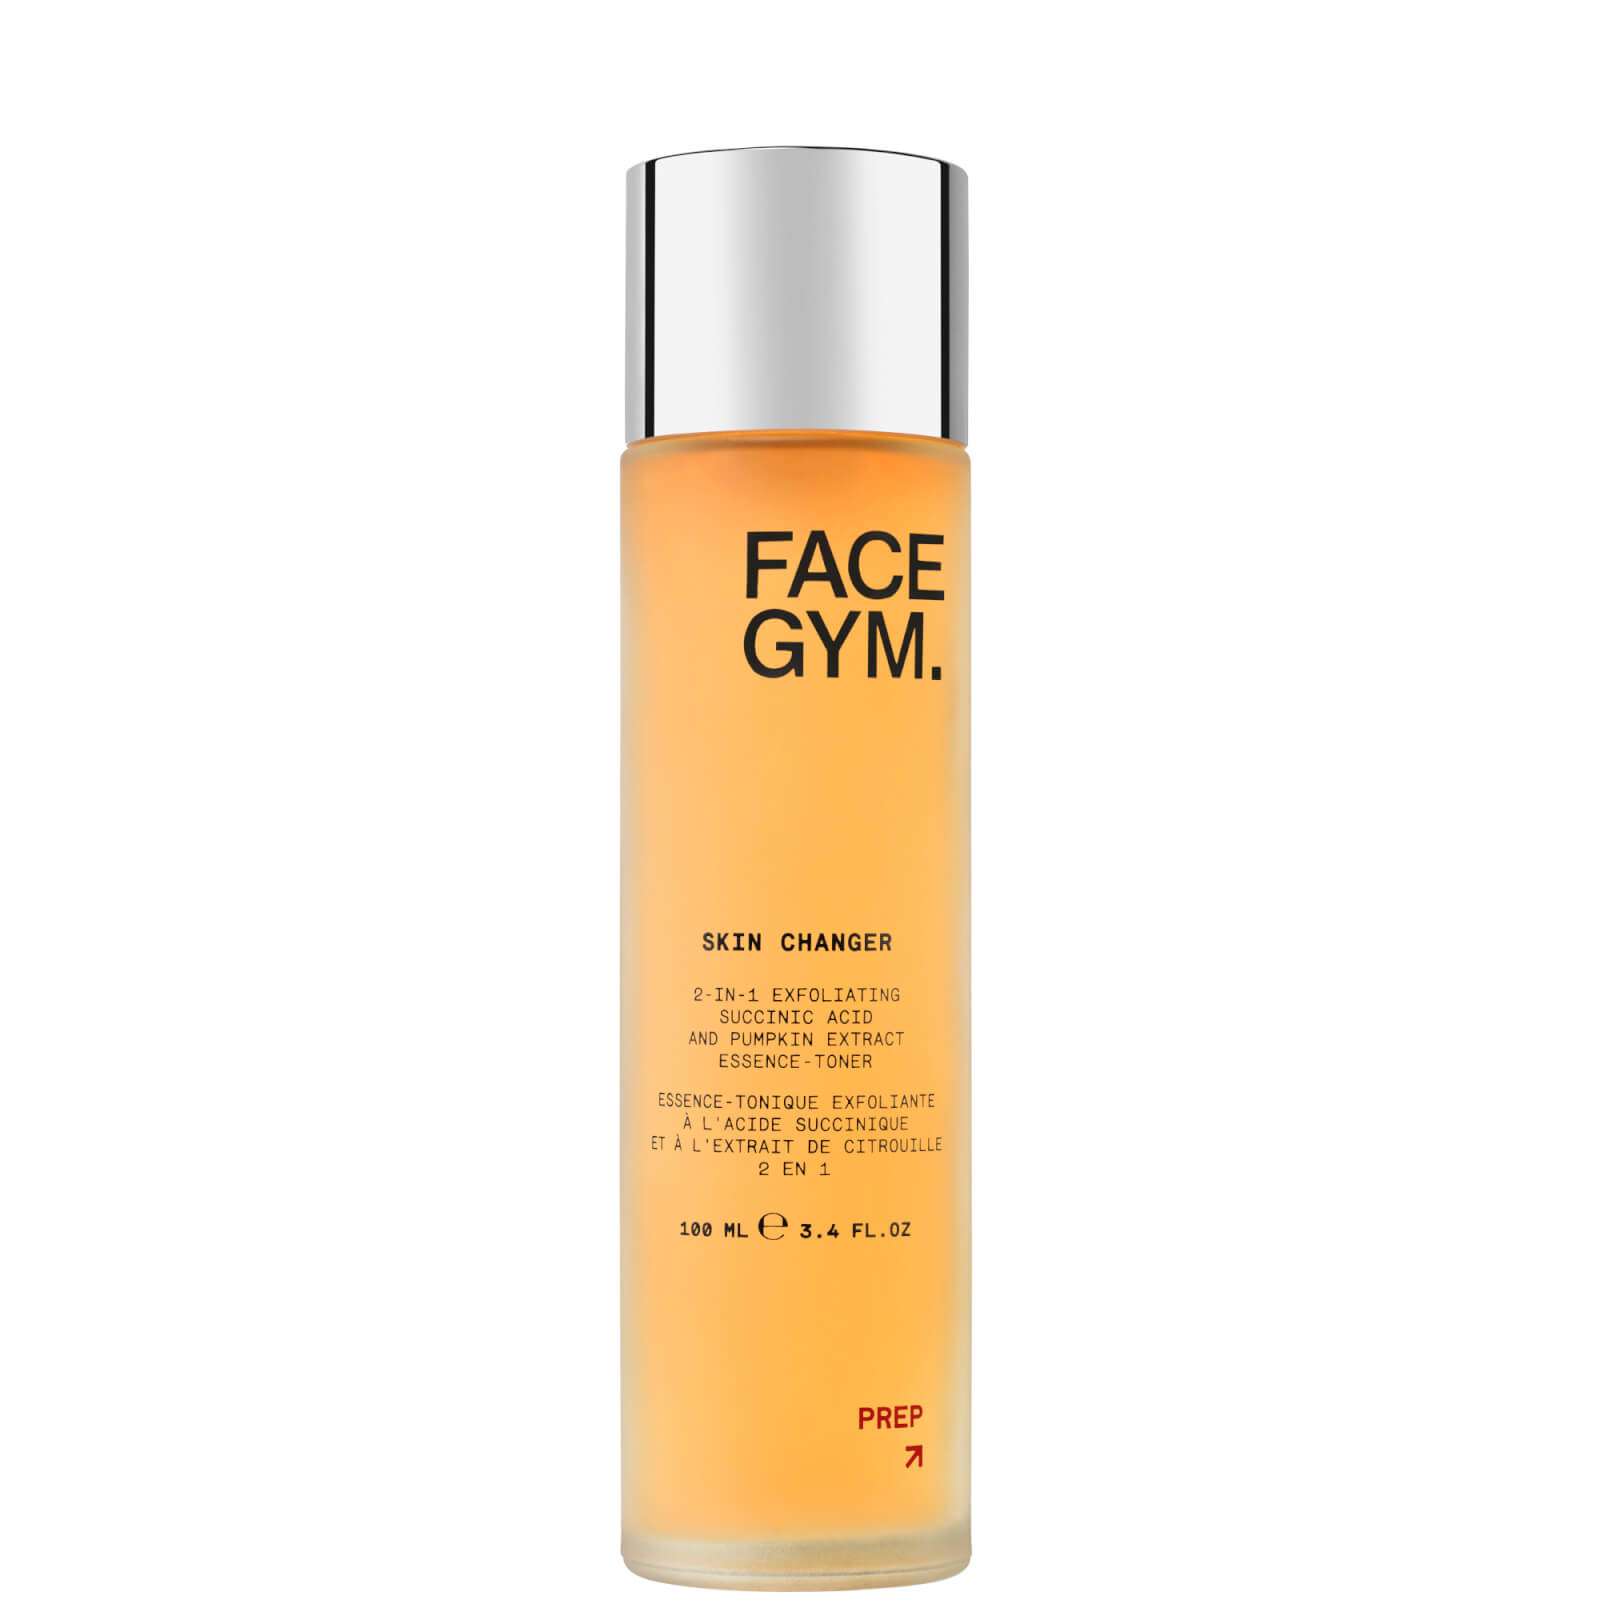 FaceGym Skin Changer 2-in-1 Exfoliating Succinic Acid and Pumpkin Extract Essence Toner (Various Sizes) - 100ml